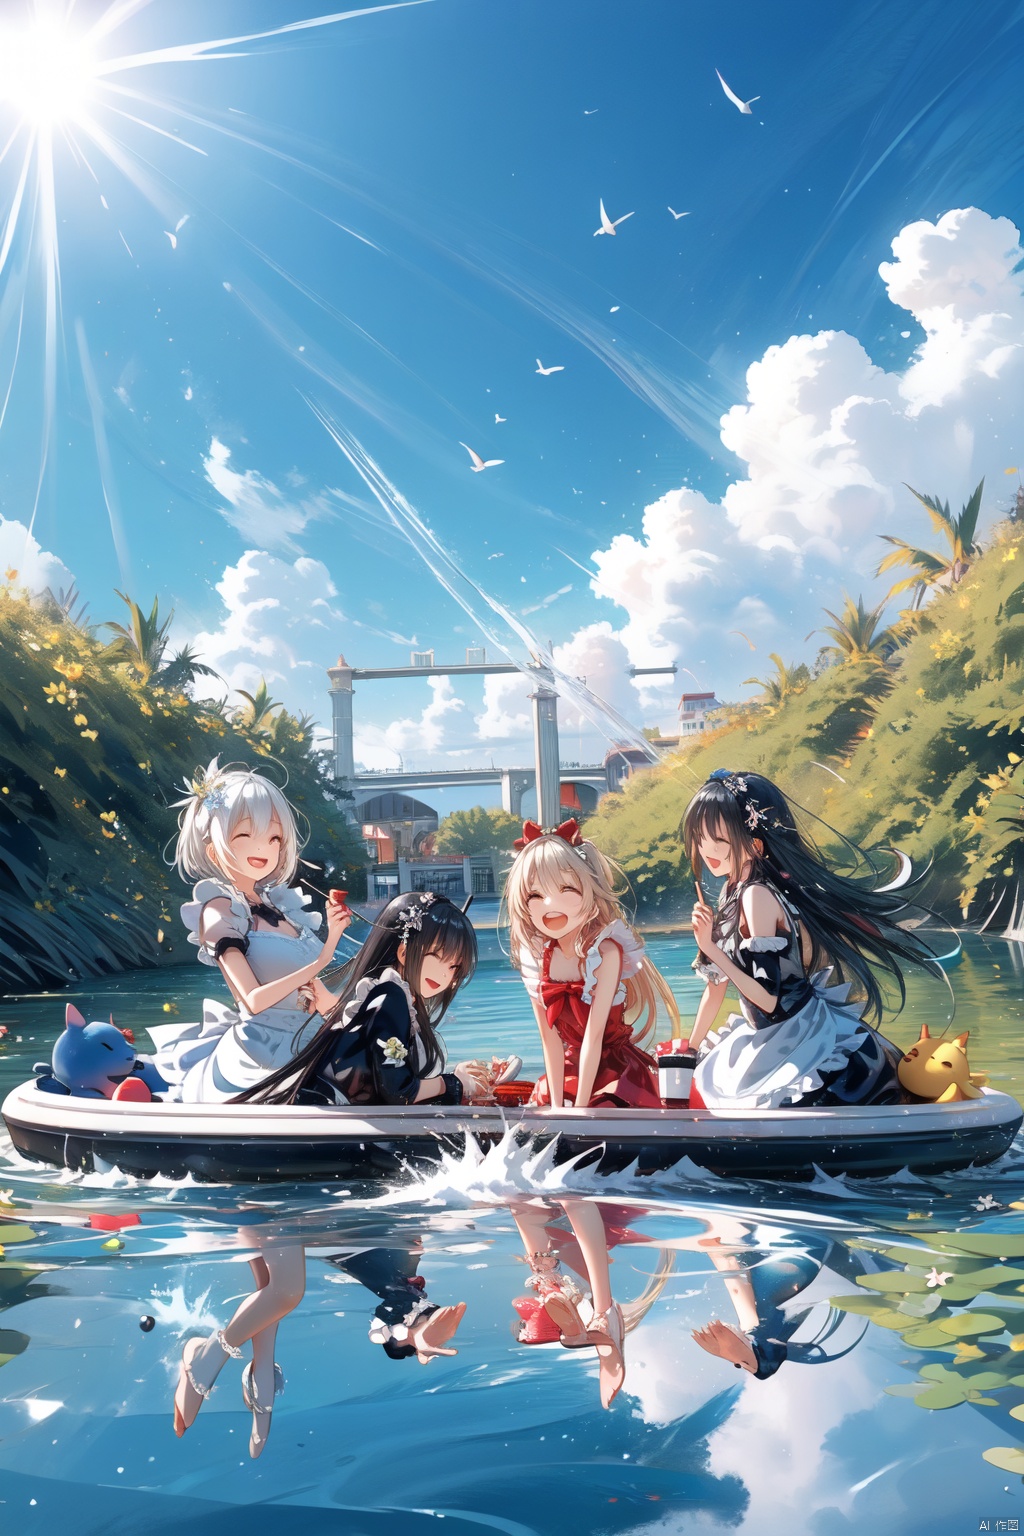  4+ girls, multiple colored hairs, sweet maids, random cute faces, super happy smiling, laughing,group shot, zoom camera, sweet tea party,lots of cakes, macarons, chocolates, parfaits, cookies, land of sweets，(masterpiece, best quality), 3boys, playing in water, lake full of flowers, clouds, sun, blue sky, good face, laughing, splashing, having fun, enjoying, water gun